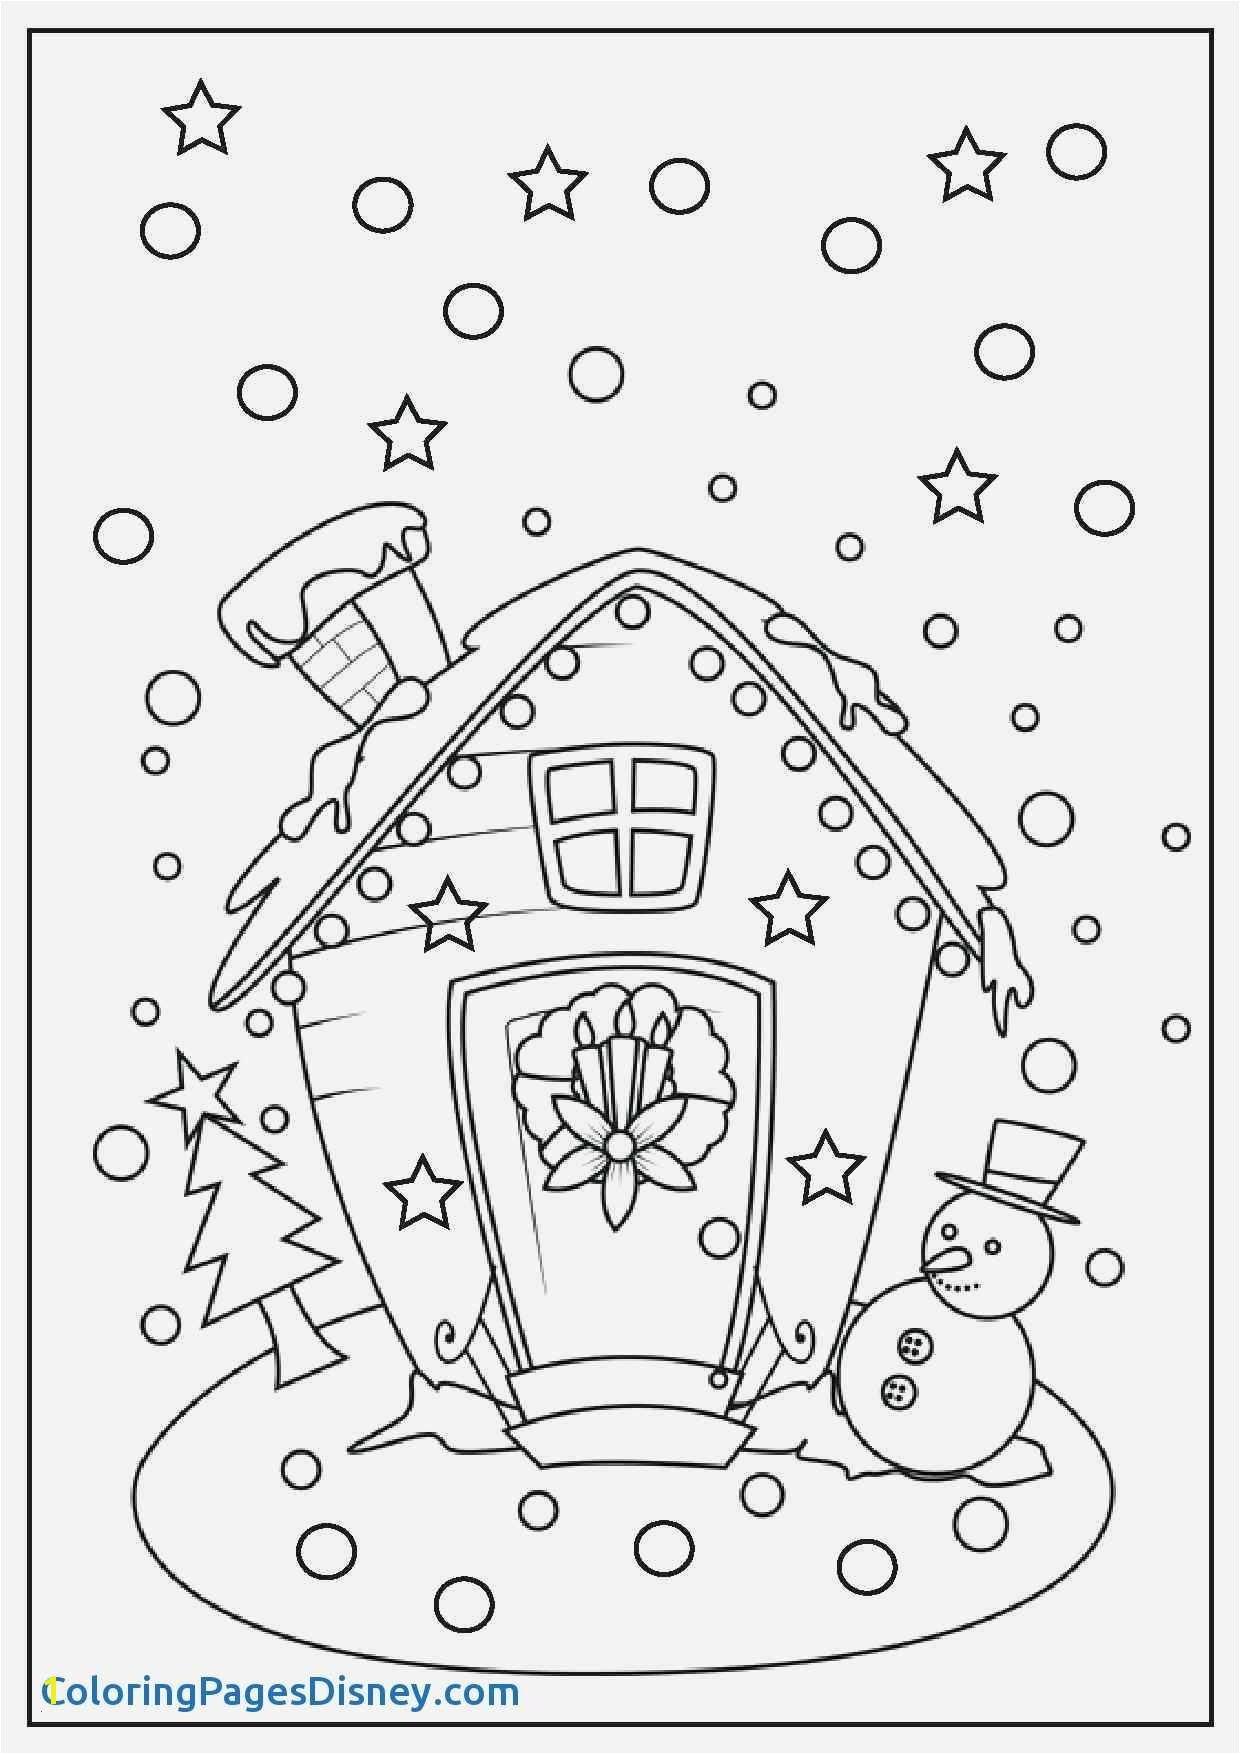 Printable Coloring Pages Bunny Coloring Pages Easter Bunny Archives Katesgrove